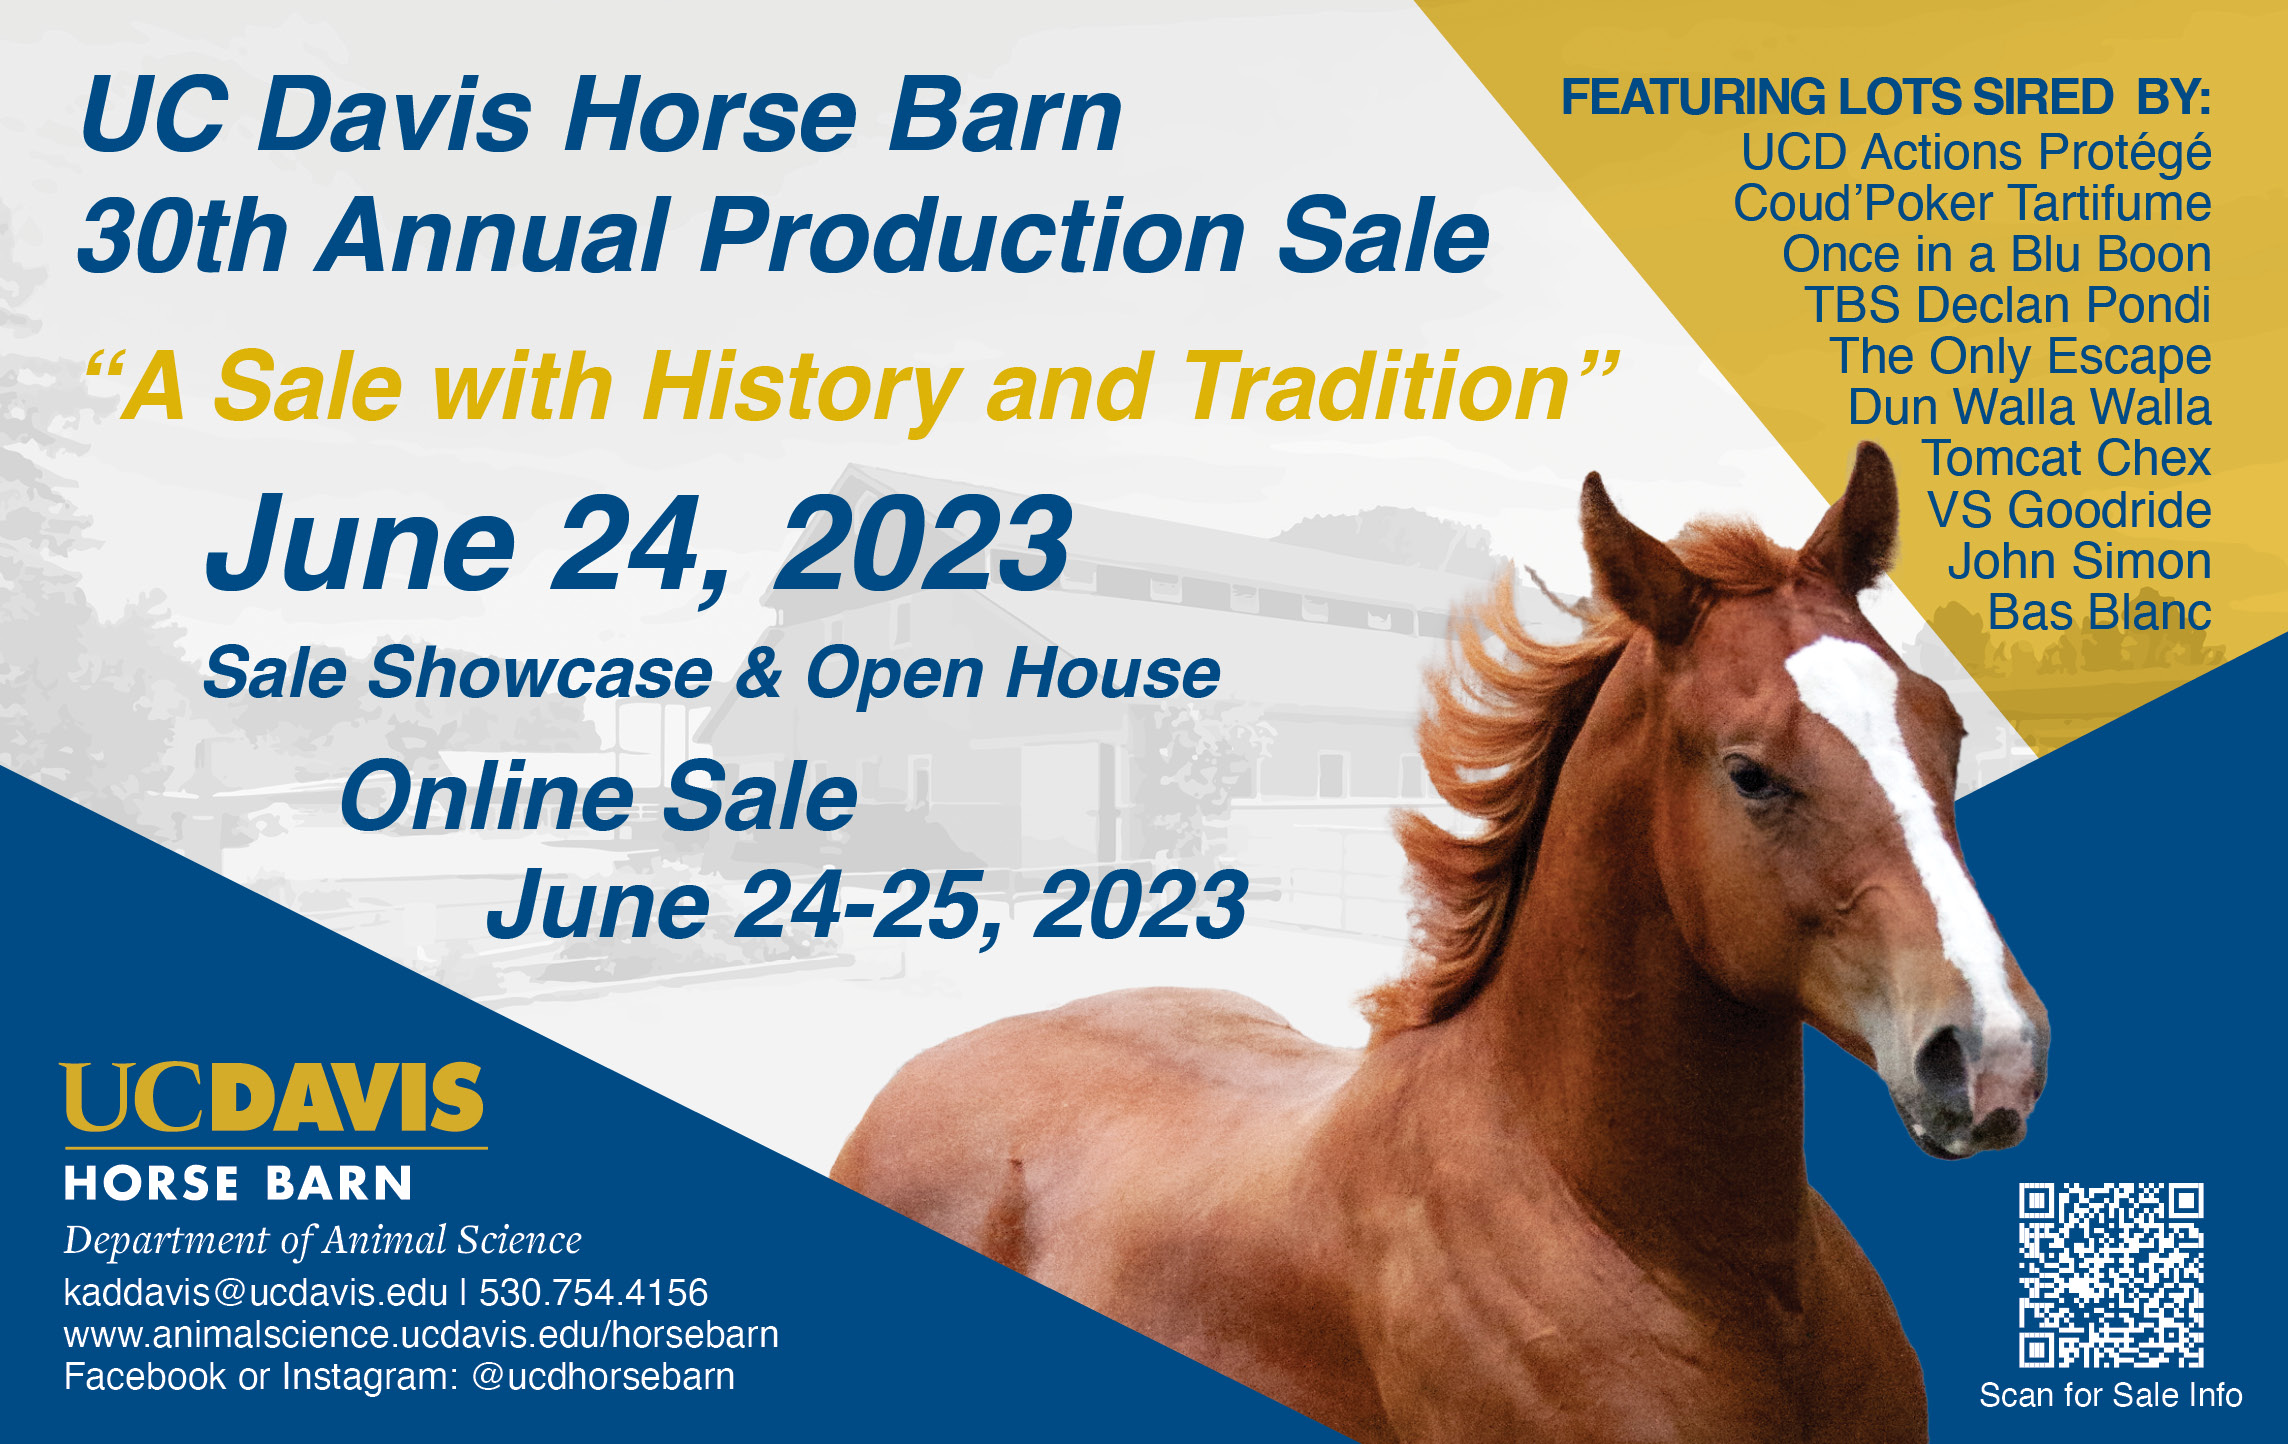 Sale ad with picture of horse. Text reads: UC Davis Horse Barn 30th Annual Production Sale. Featuring lots sired by: UCD Actions Protege, Coud'Poker Tartifume, Once in a Blu Boon, TBS Declan Pondi, The Only Escape, Dun Walla Walla, Tomcat Chex, VS Goodride, John Simon, and Bas Blanc